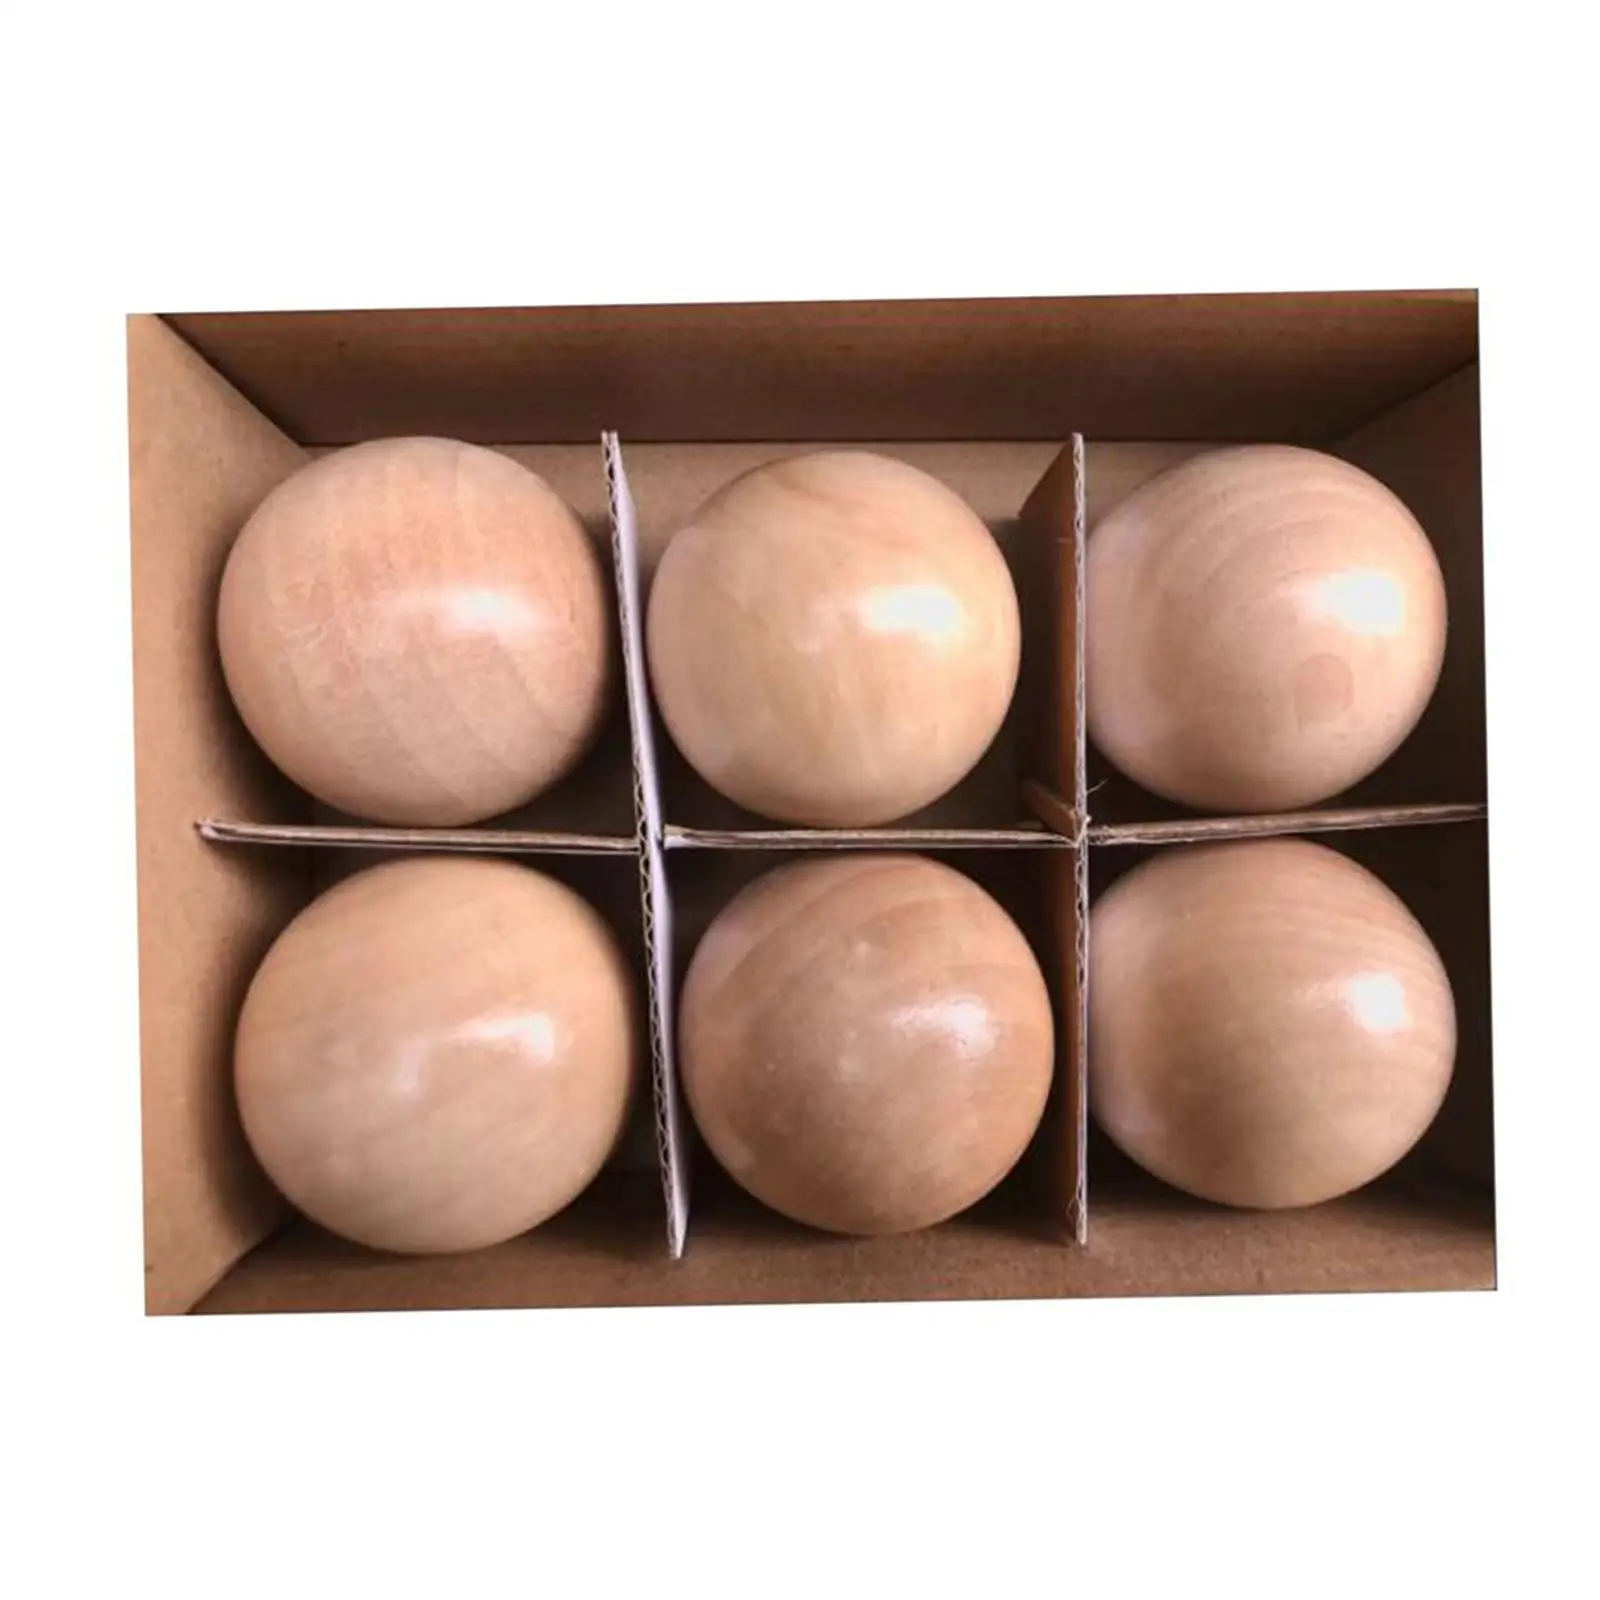 6x Montessori Wooden Balls Counting Toy for Hand Eye Coordination Creativity Object Permanence Box Handcraft Wooden Toys